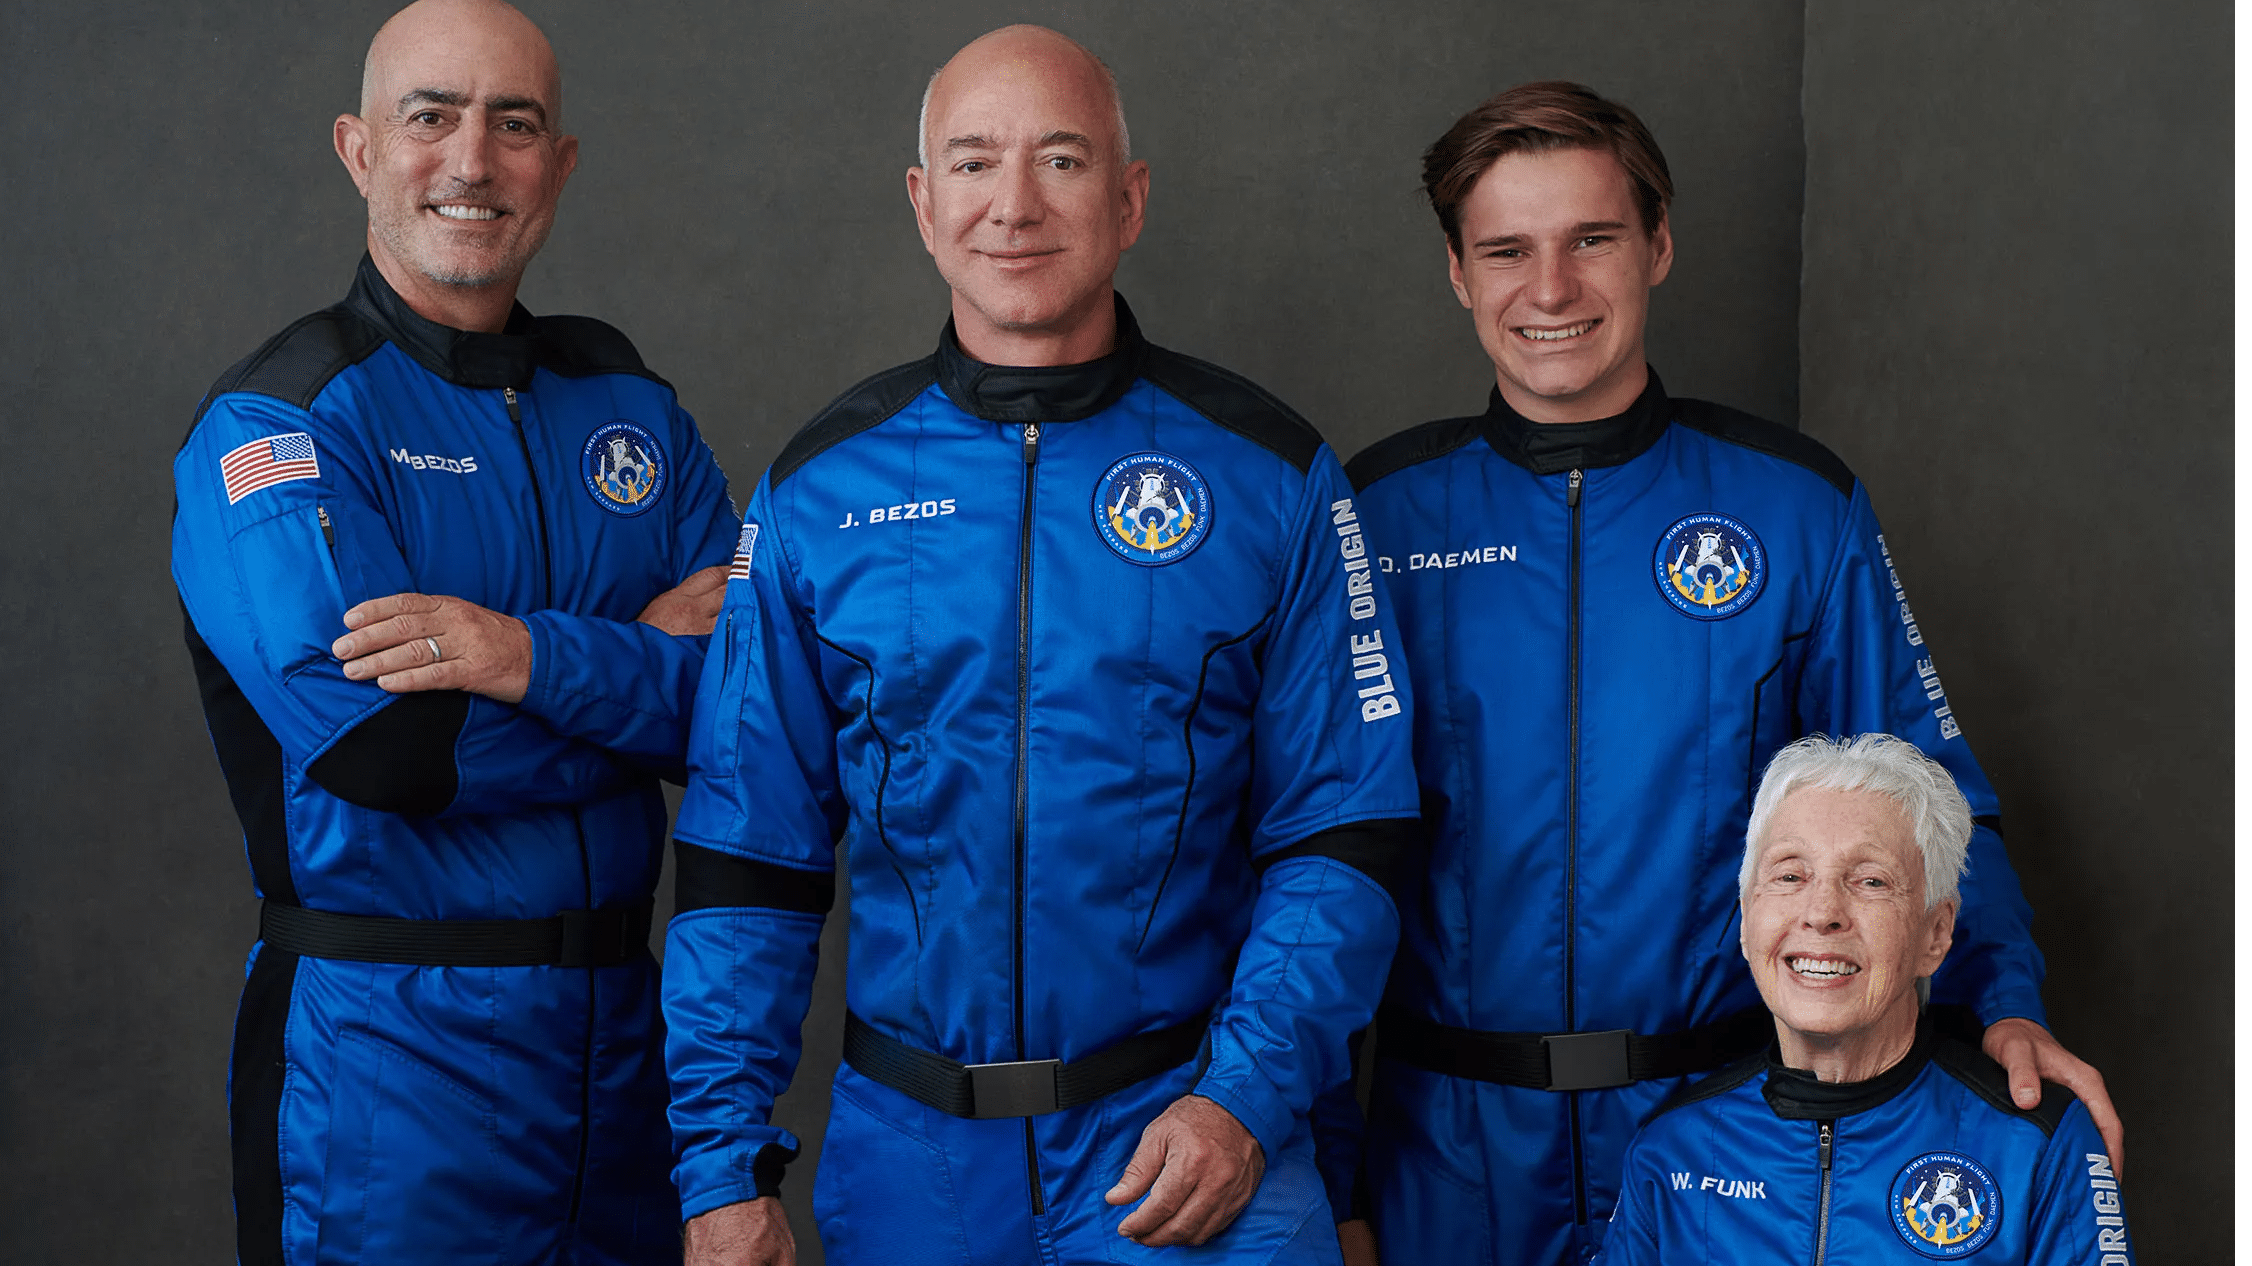 Want to fly on Blue Origin flight? Here are the physical requirements